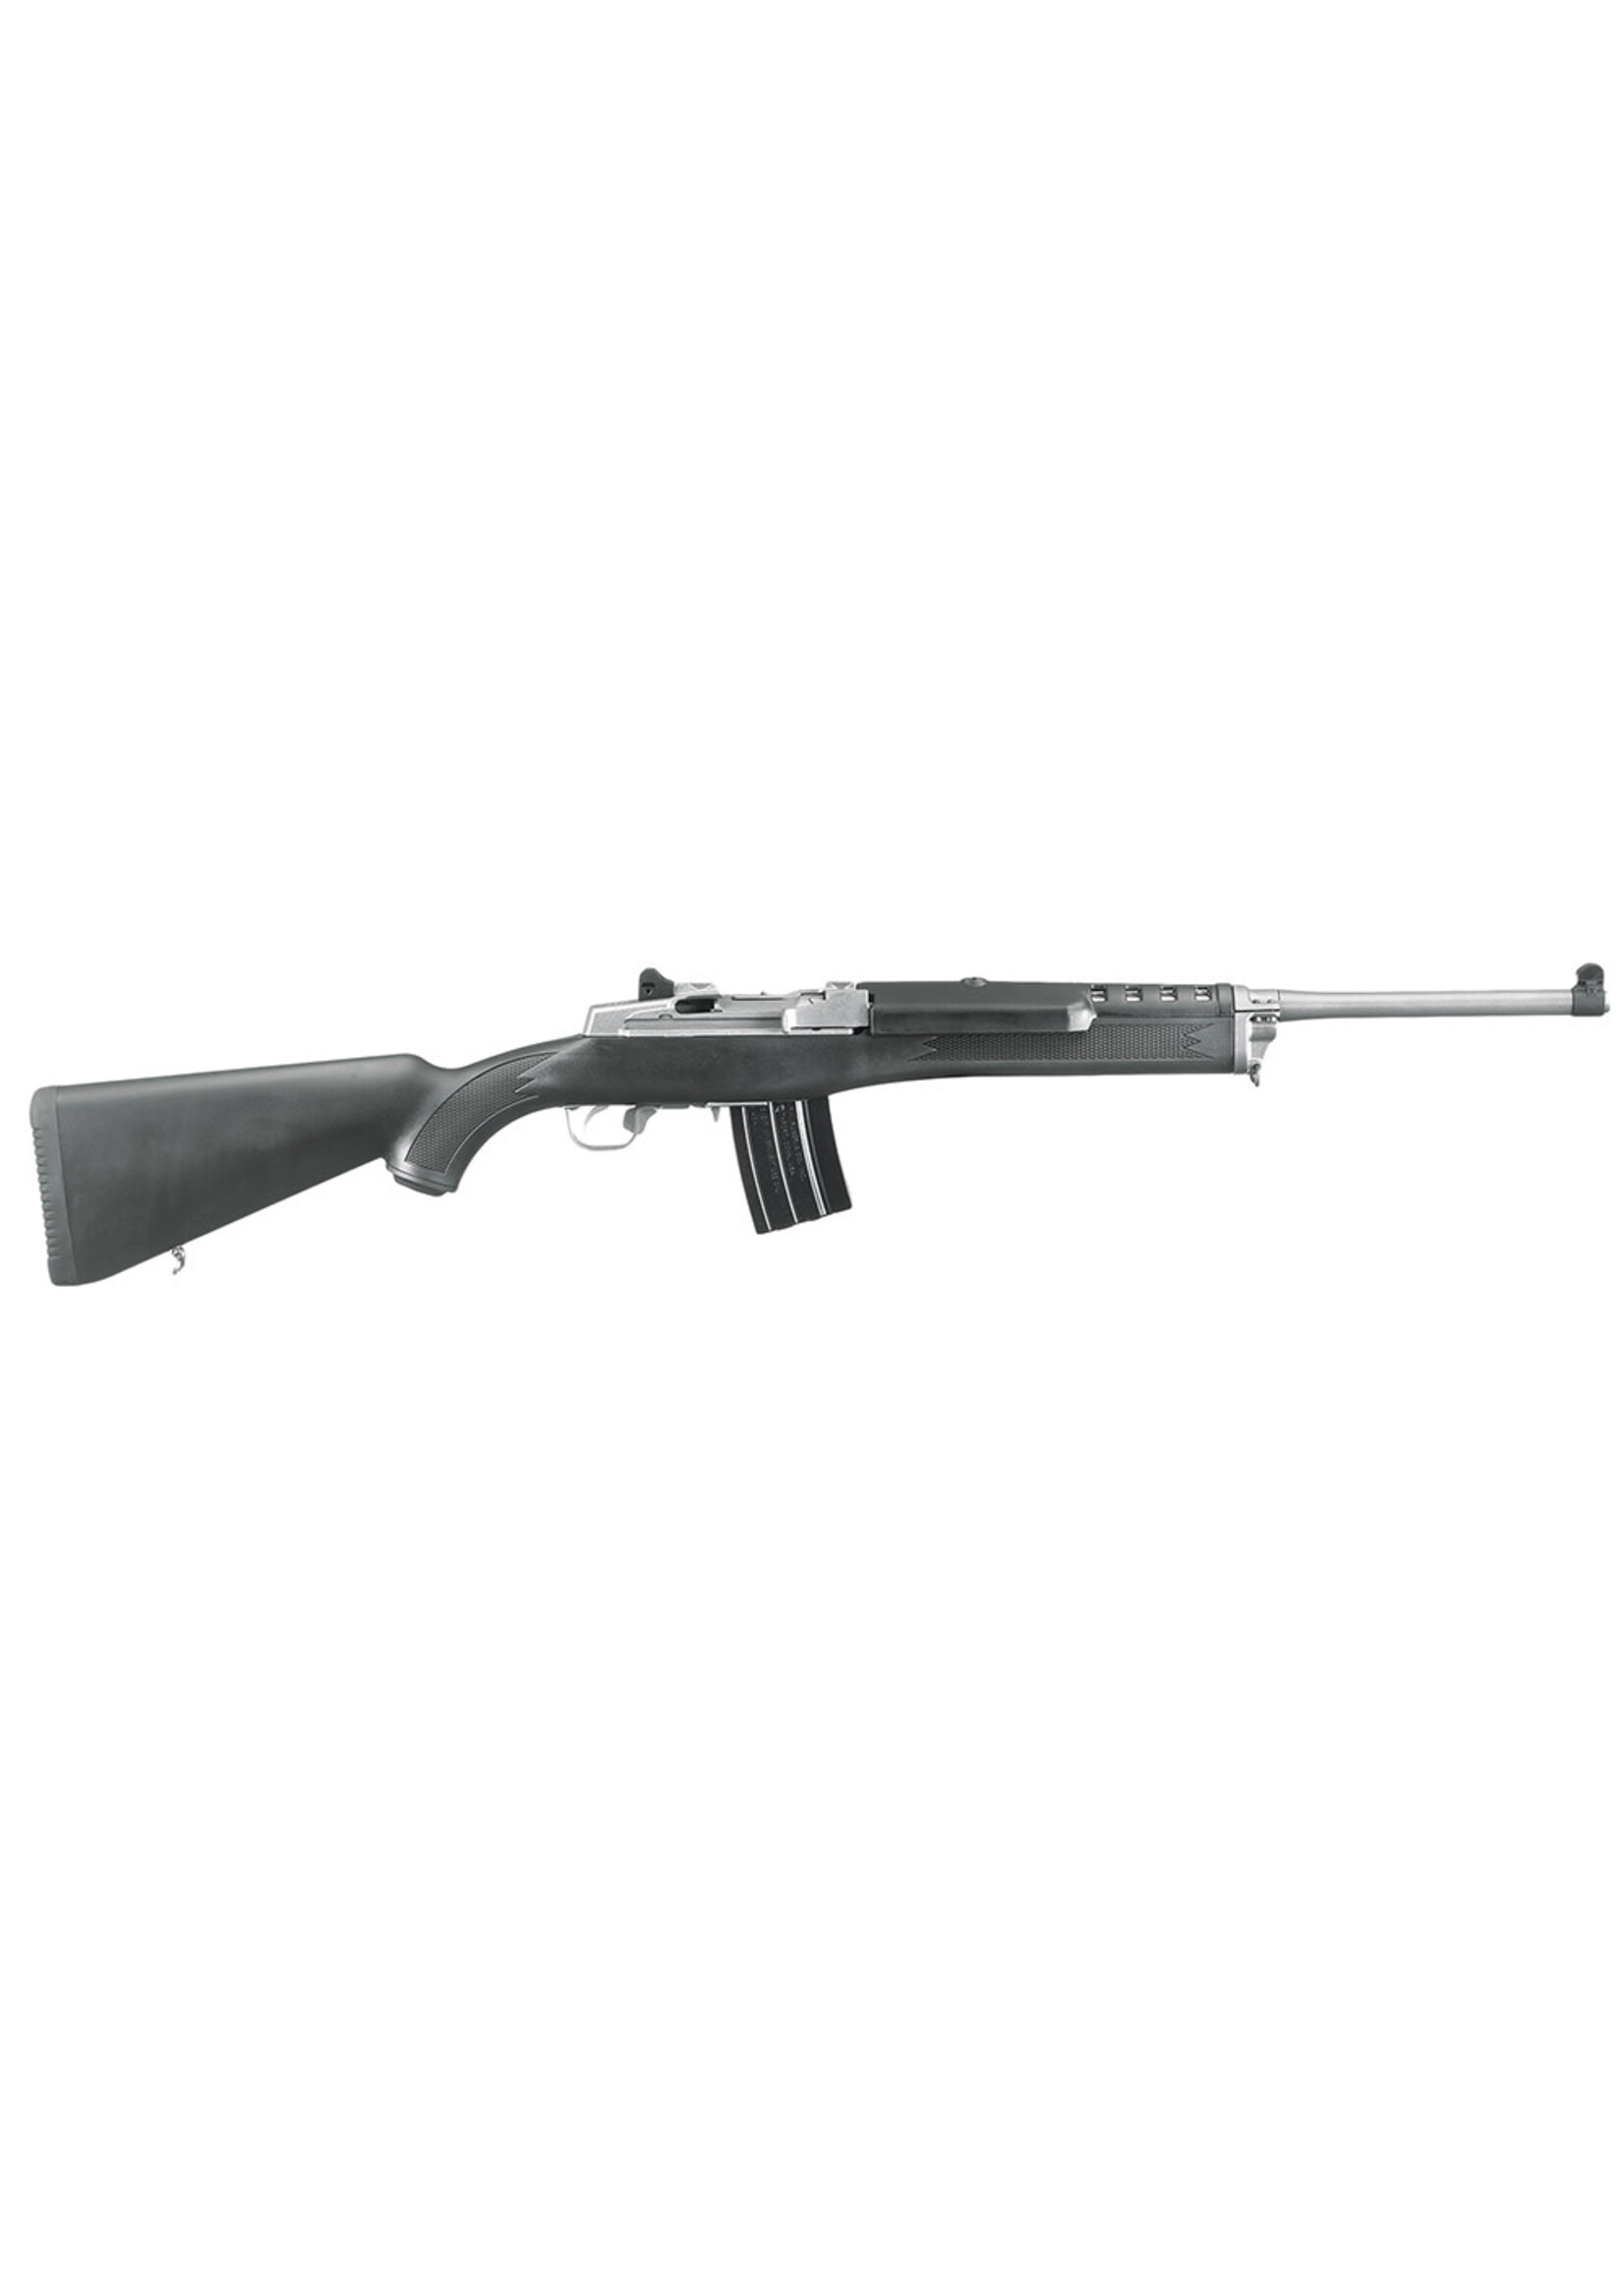 Ruger Ruger 5817 Mini-14 Ranch 5.56x45mm NATO 20+1 18.50" Barrel, Matte Stainless Steel, Synthetic Stock, Optics Ready